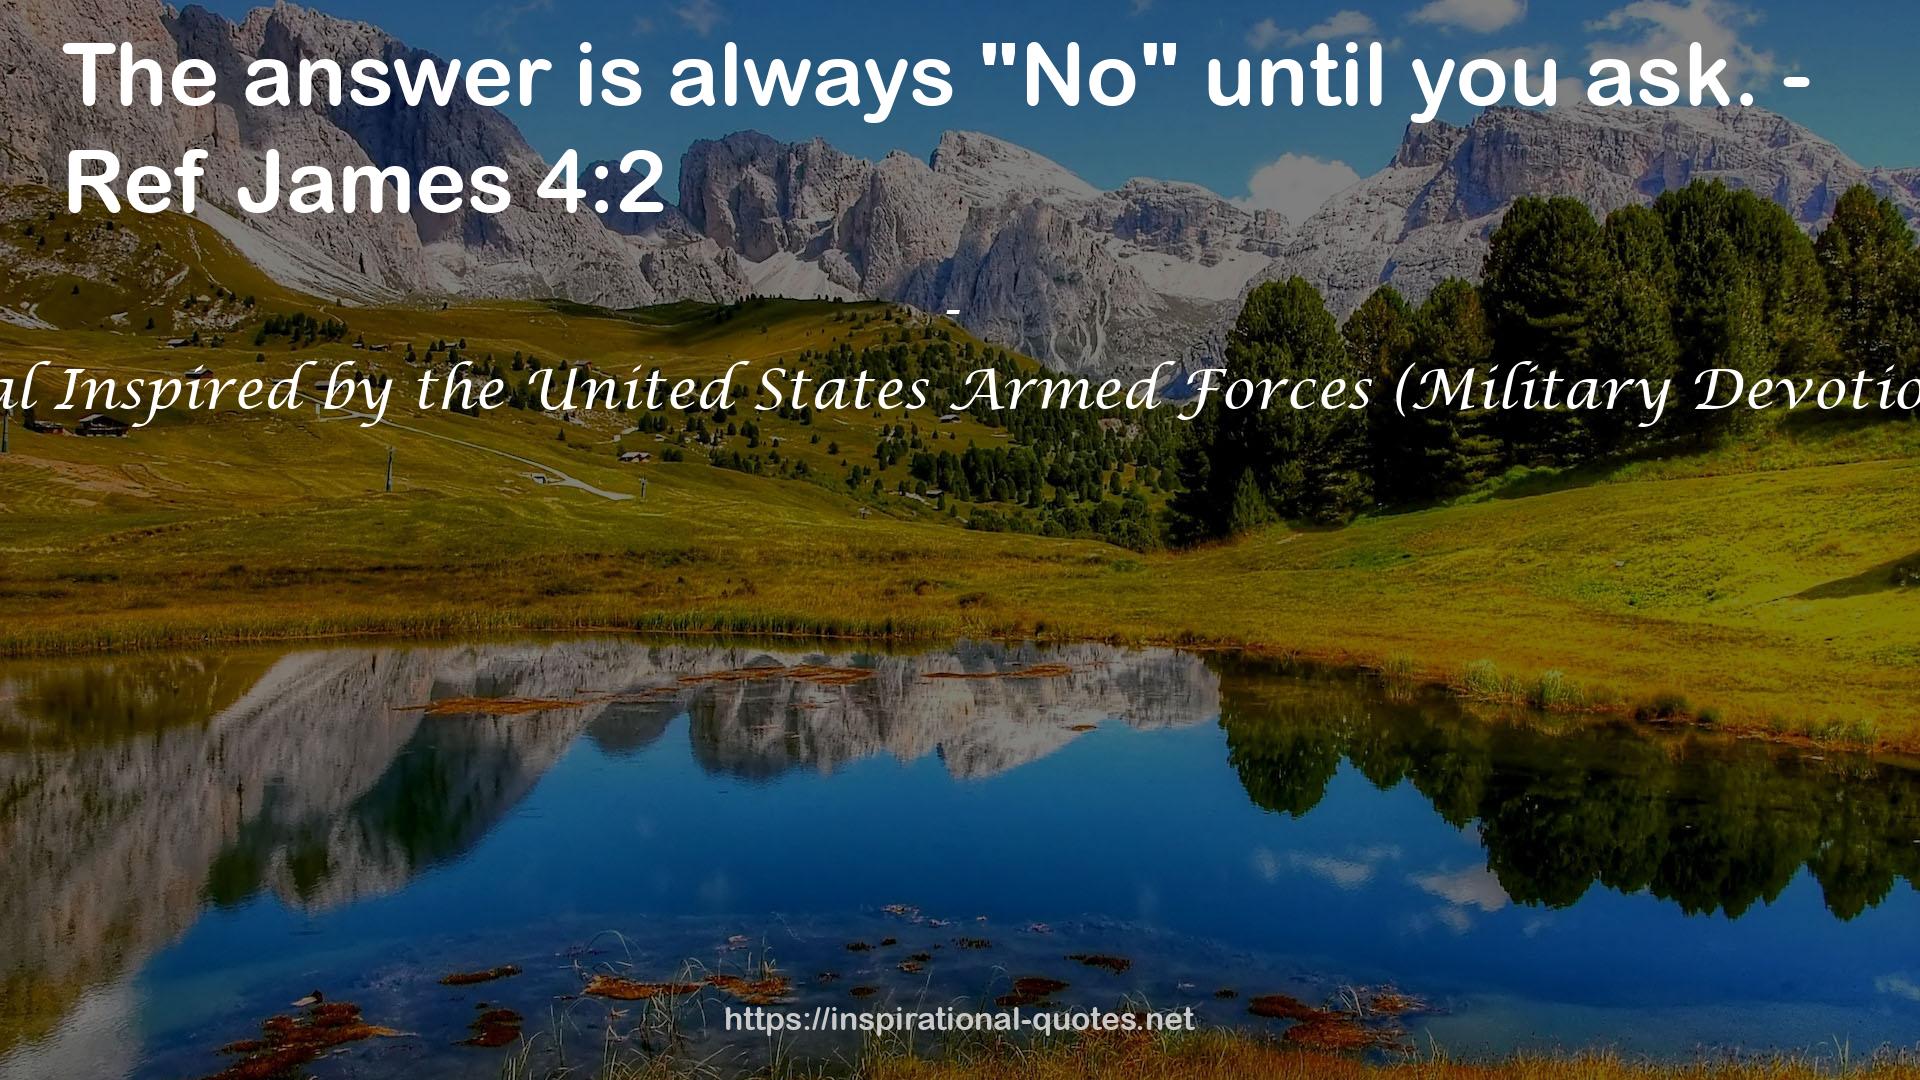 DAILY VICTORY: 40 Day Devotional Inspired by the United States Armed Forces (Military Devotions for the Everyday Warrior Book 1) QUOTES